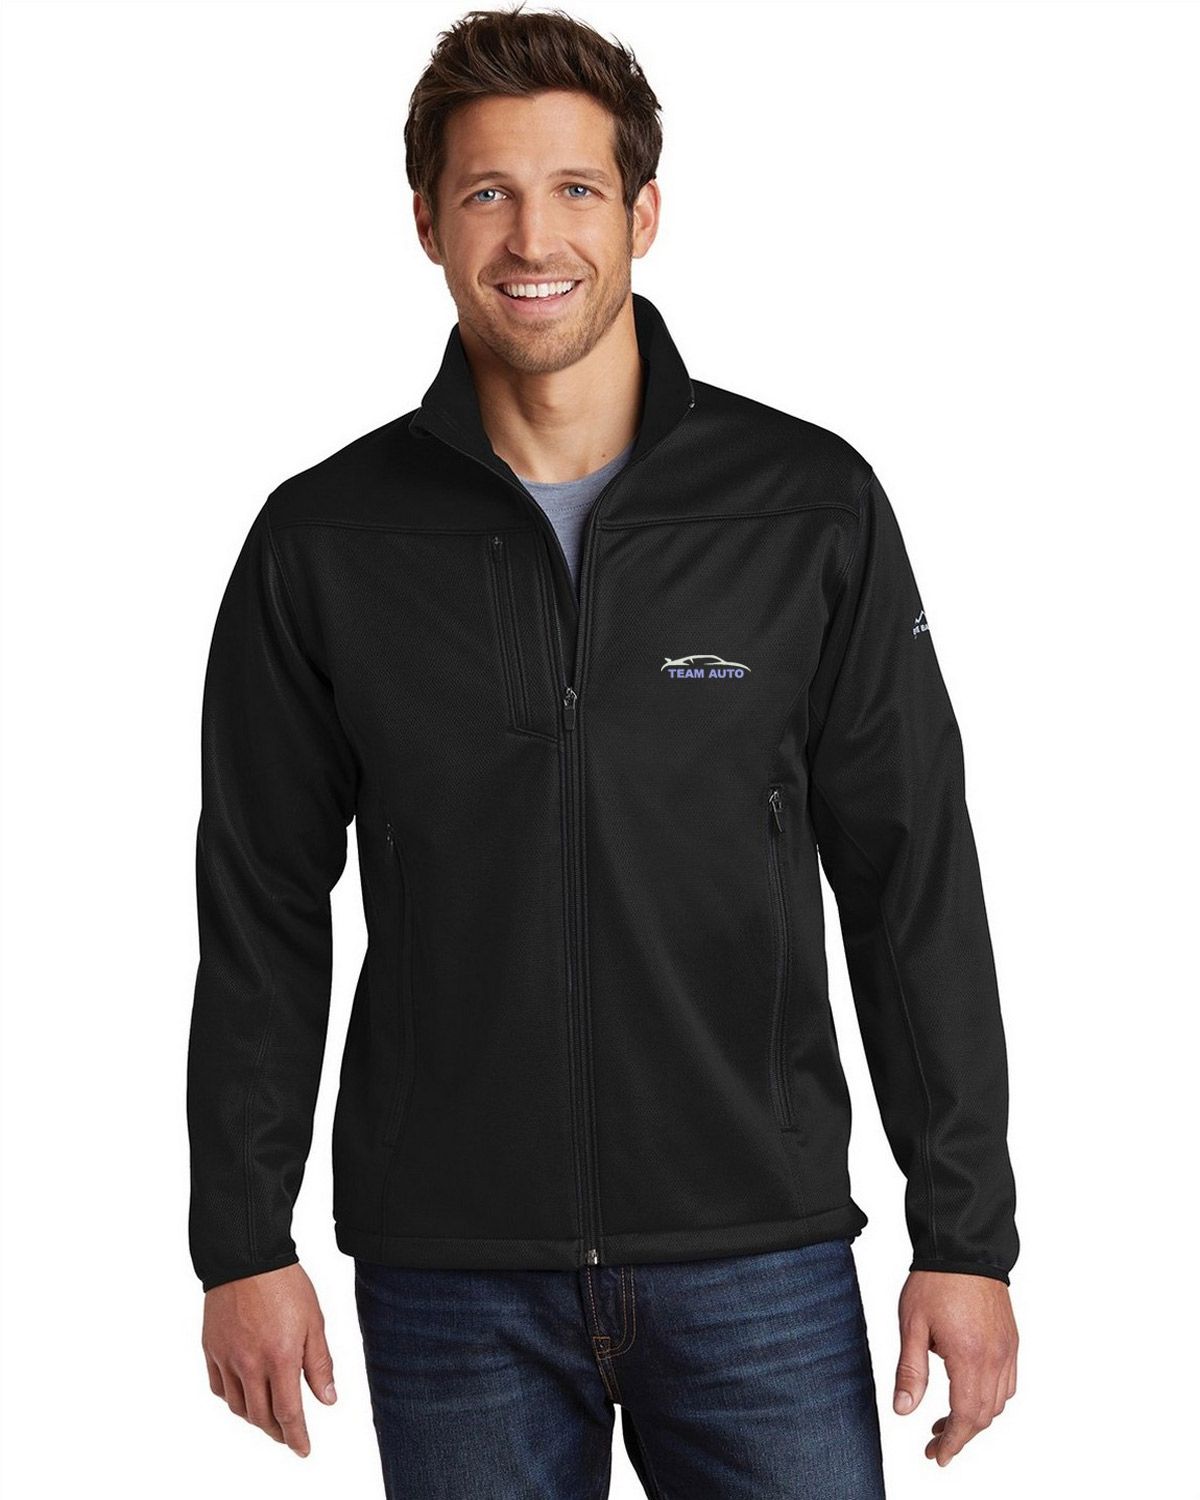 Size Chart for Eddie Bauer Logo Embroidered Weather Resist Jacket - For Men